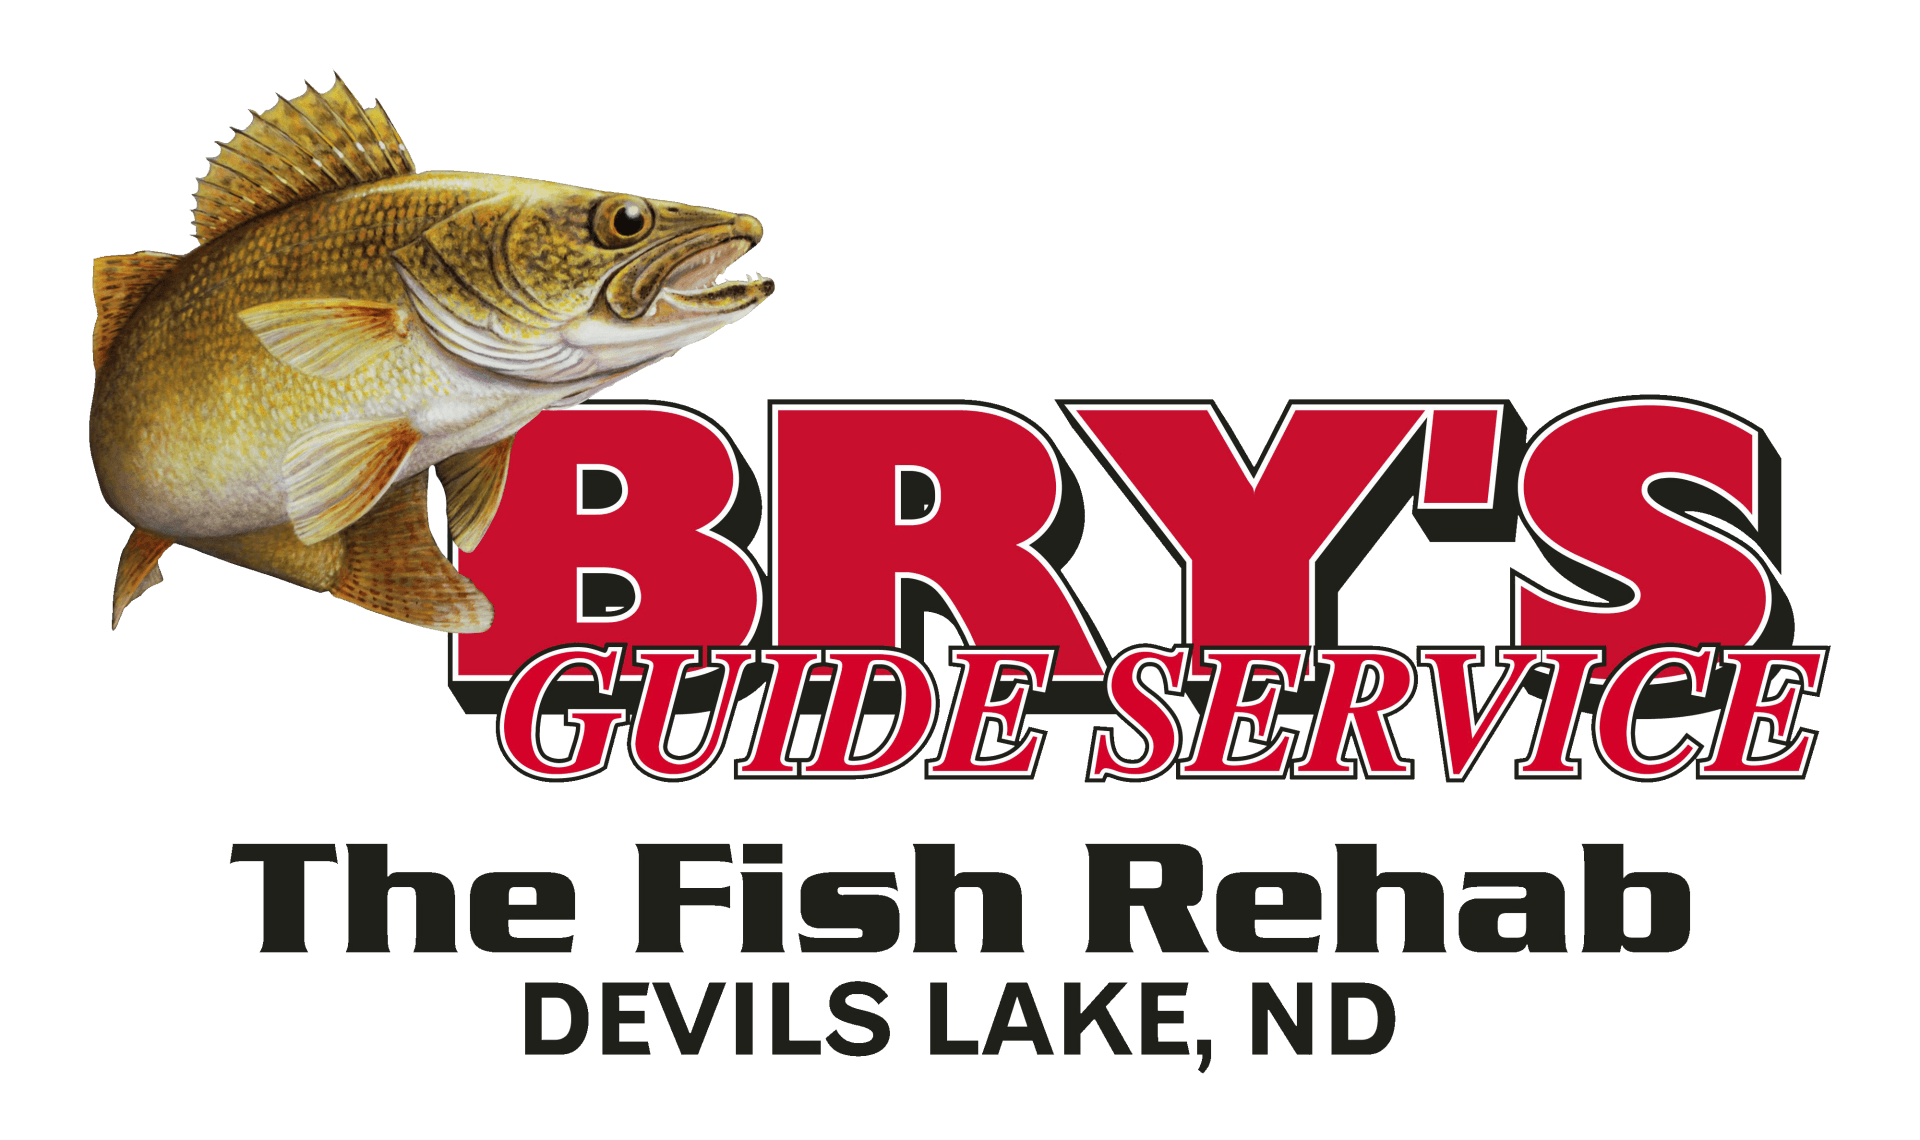 Bry's Guide Service Ice Fishing Devils Lake, ND